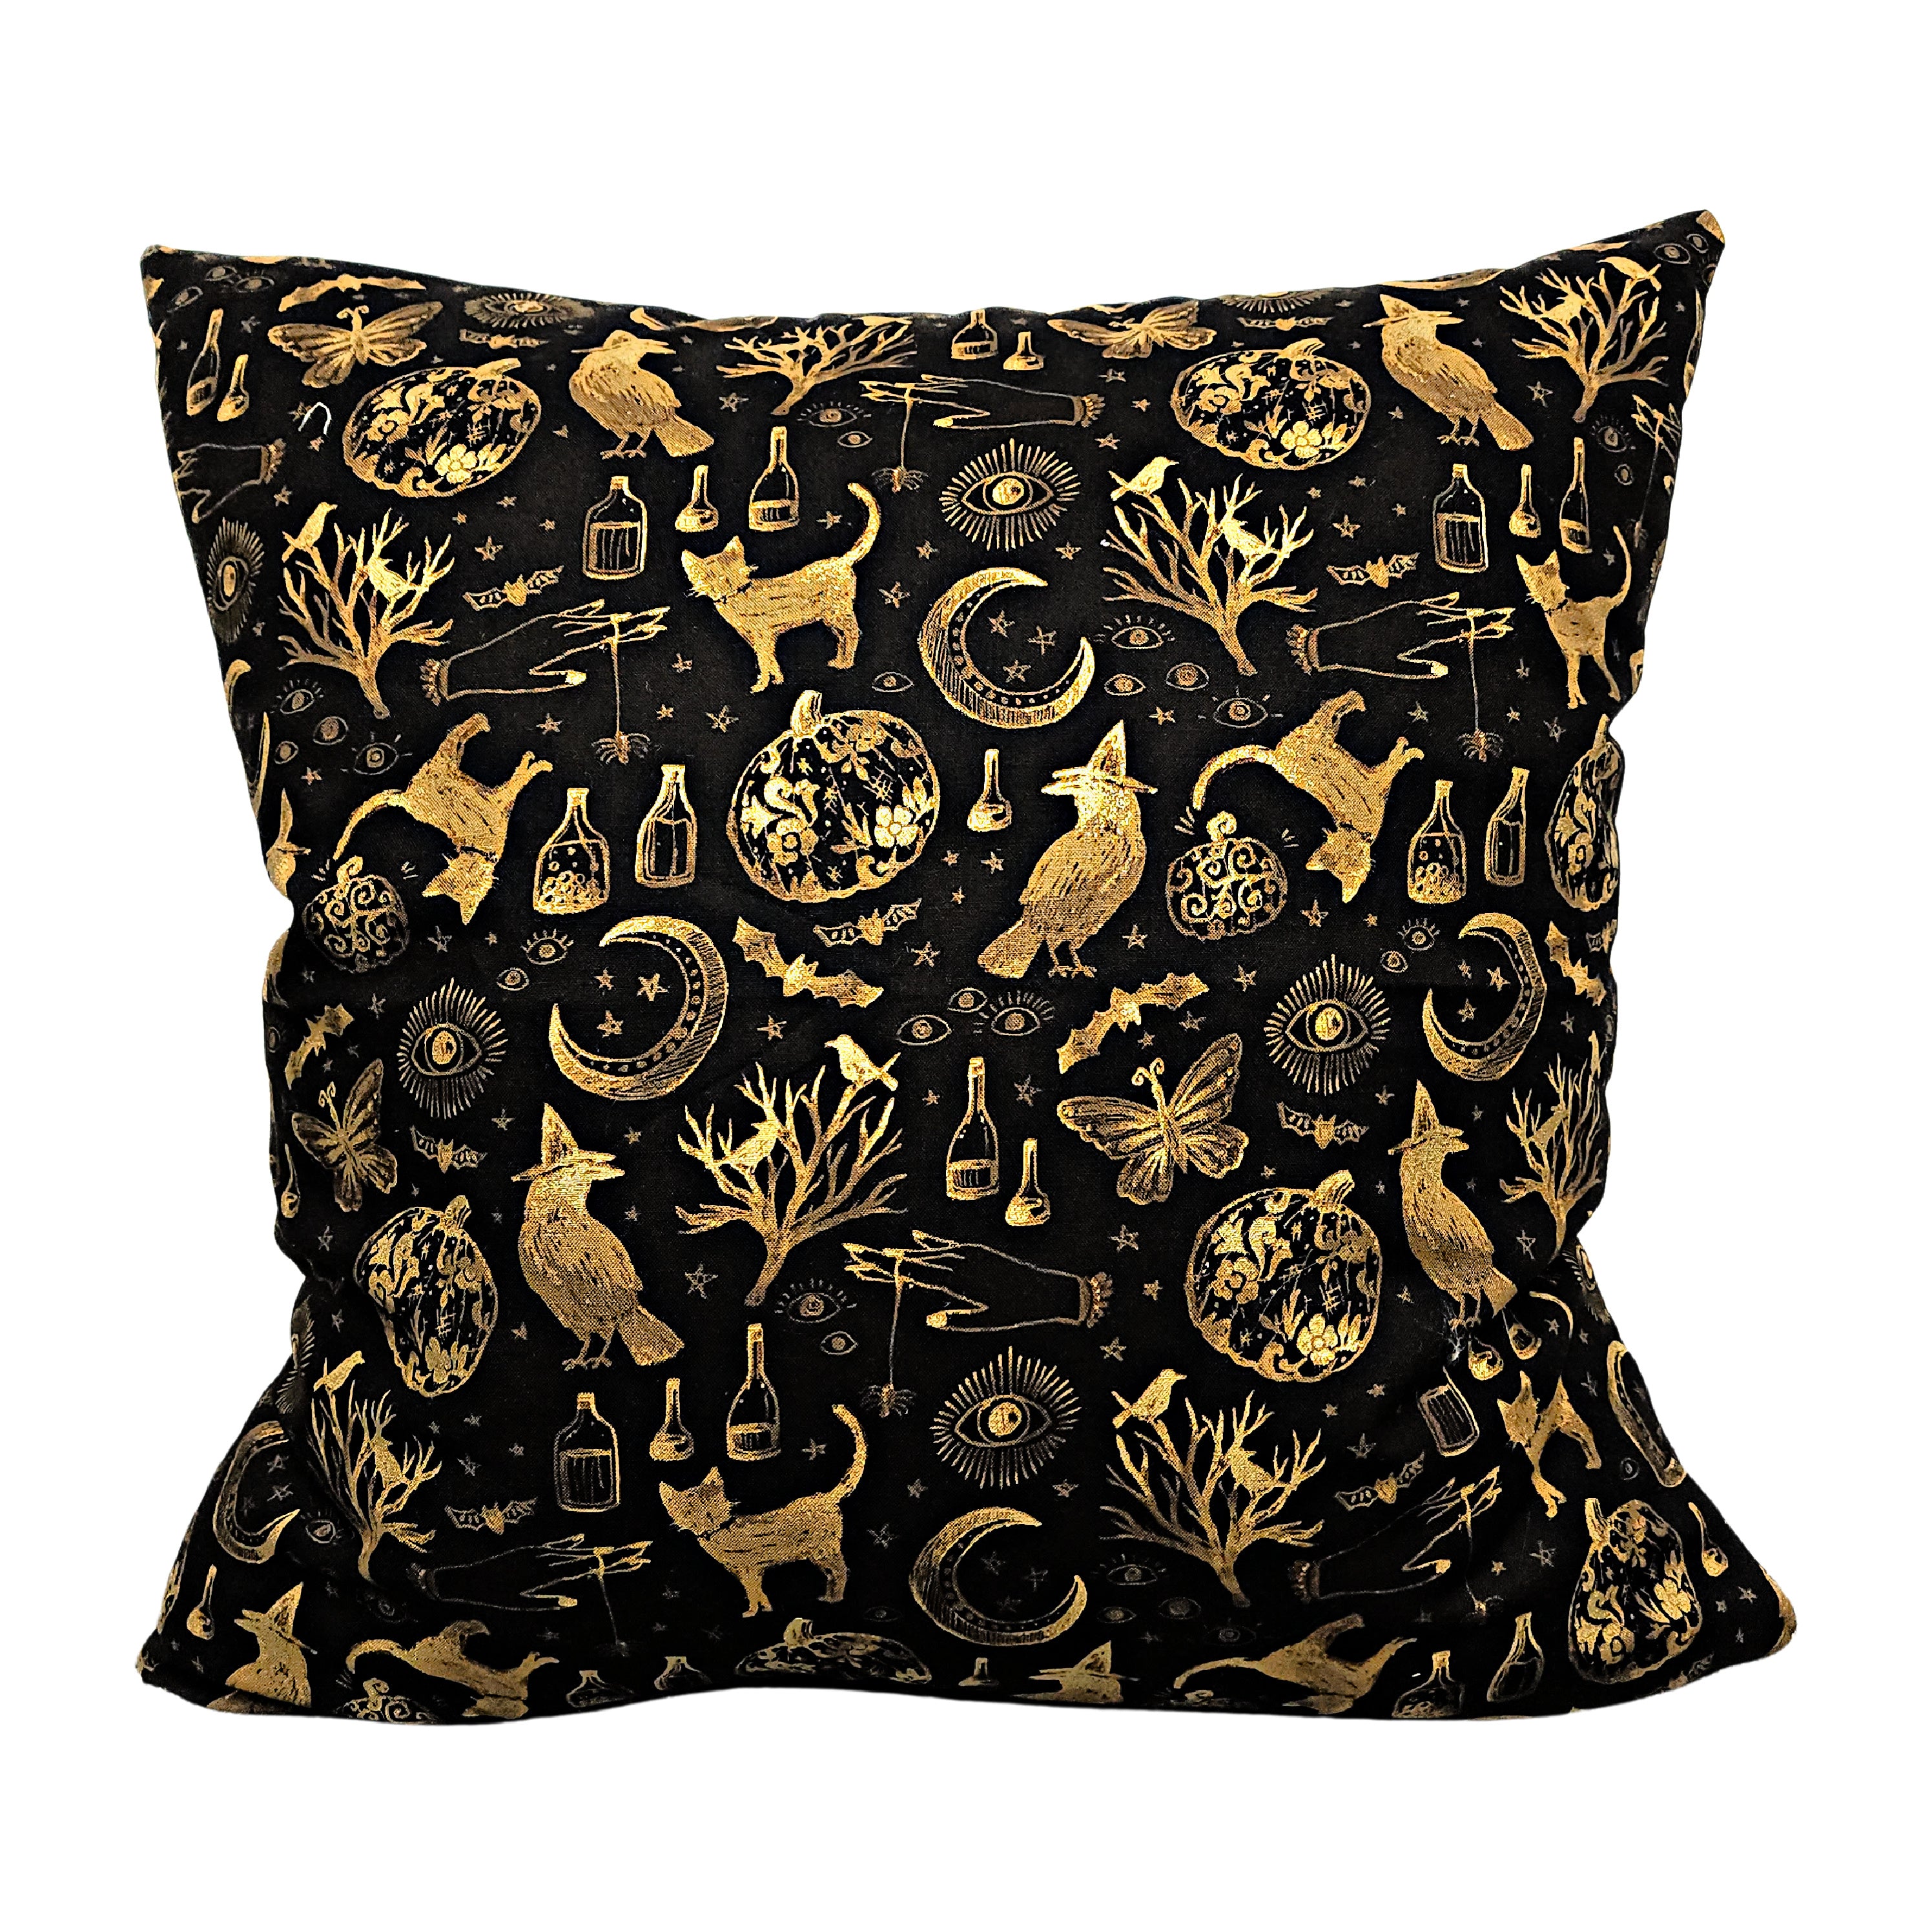 Gold and Black Magical Halloween Throw Pillow Cover, 18 x 18